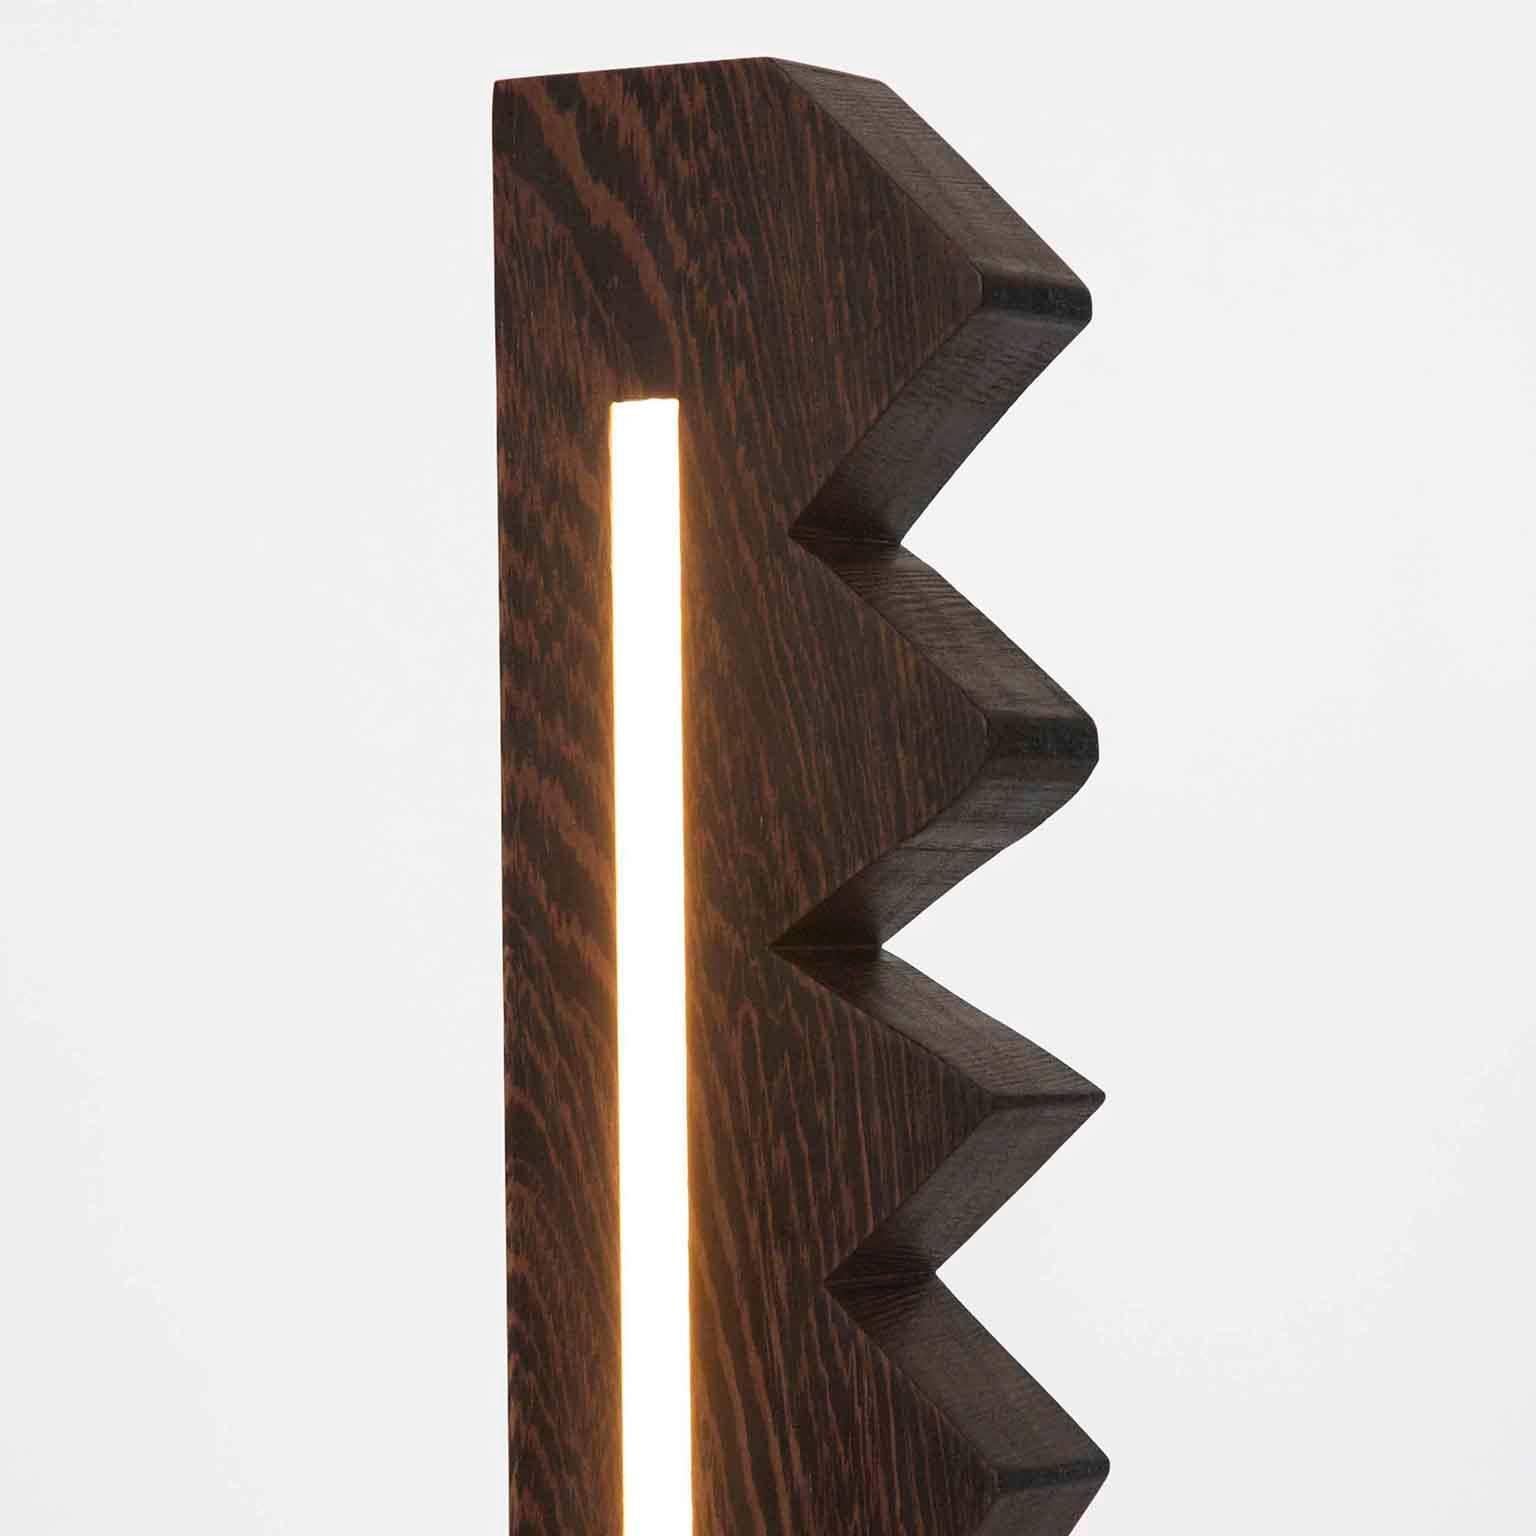 Fort Makers' Chunky Zag Wenge Line Light is made in Brooklyn by Noah Spencer. This sculptural LED light juxtaposes hard lines with soft reflected light and emits an ambient aura. The lifespan of an LED strip is approximately 50,000 hours.
12 Volts